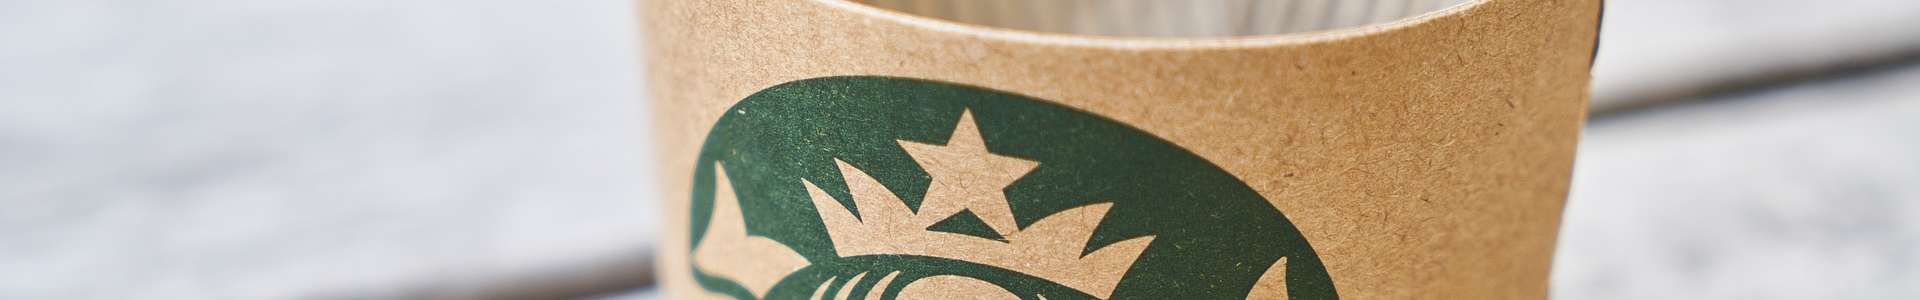 Nestlé closed coffee deal with Starbucks